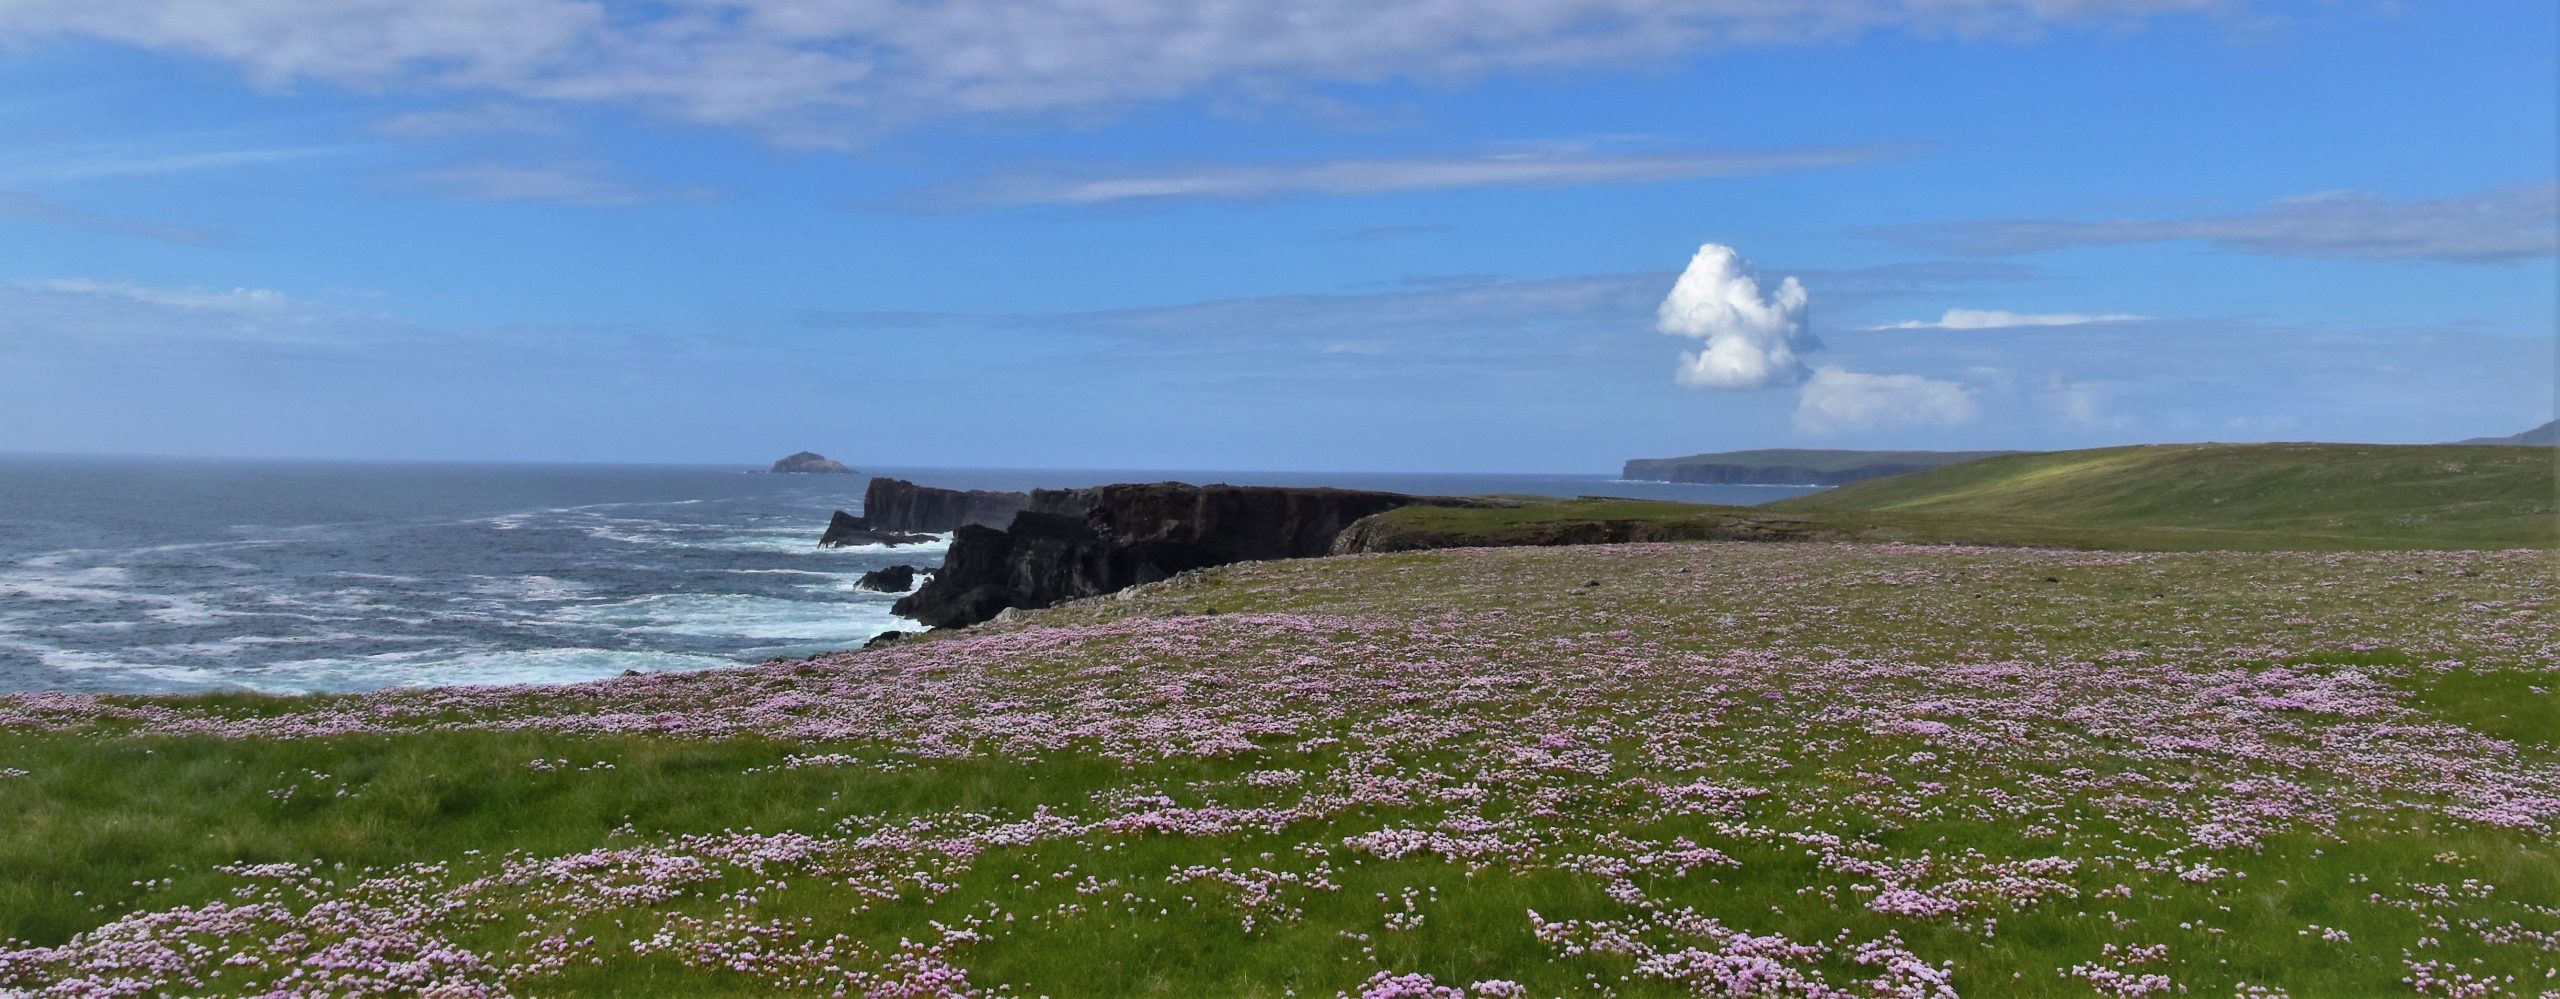 Eshaness cliffs with sea pinks in the foreground